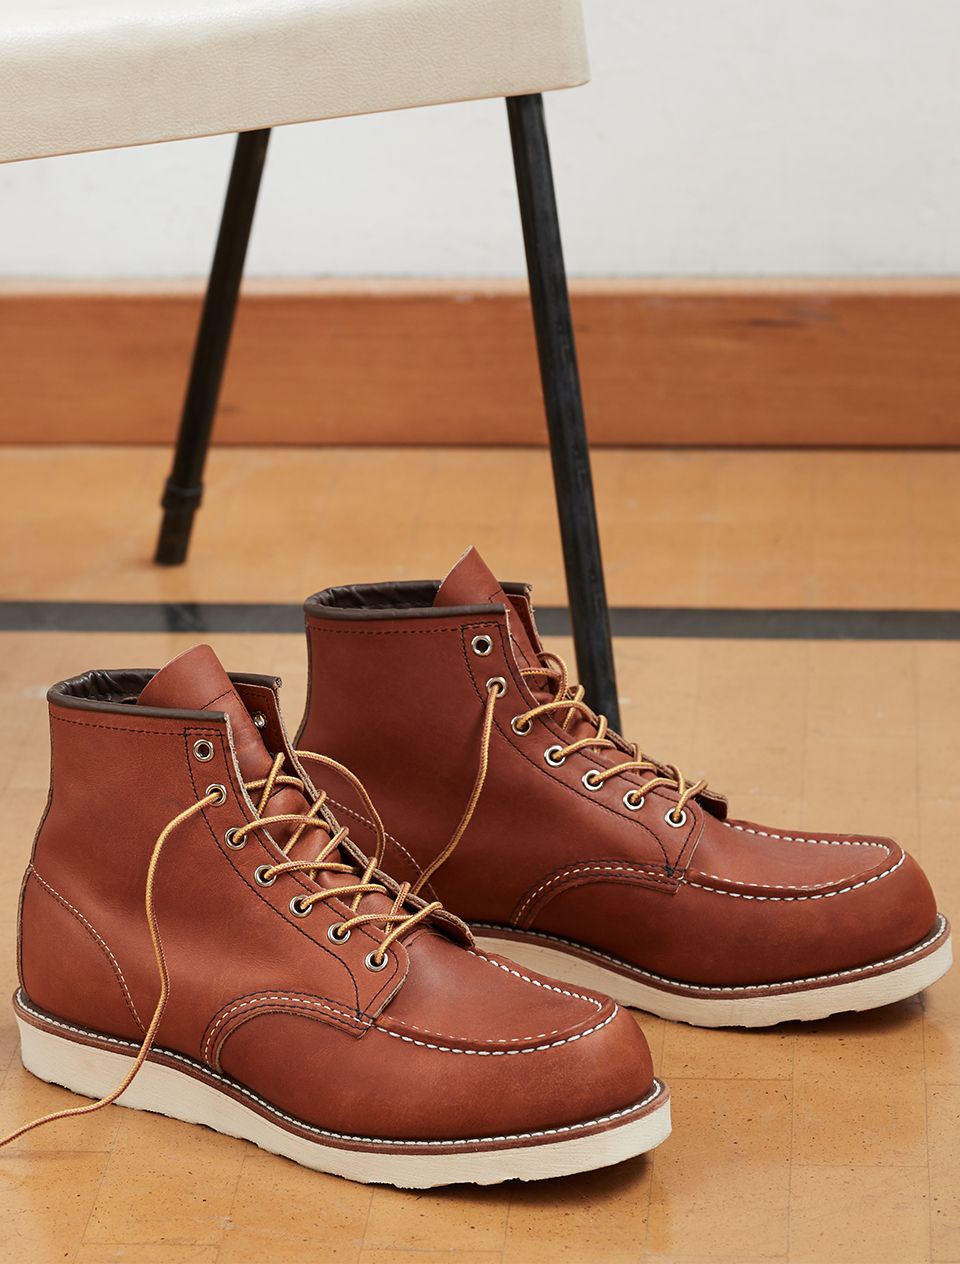 Redwing utility boots